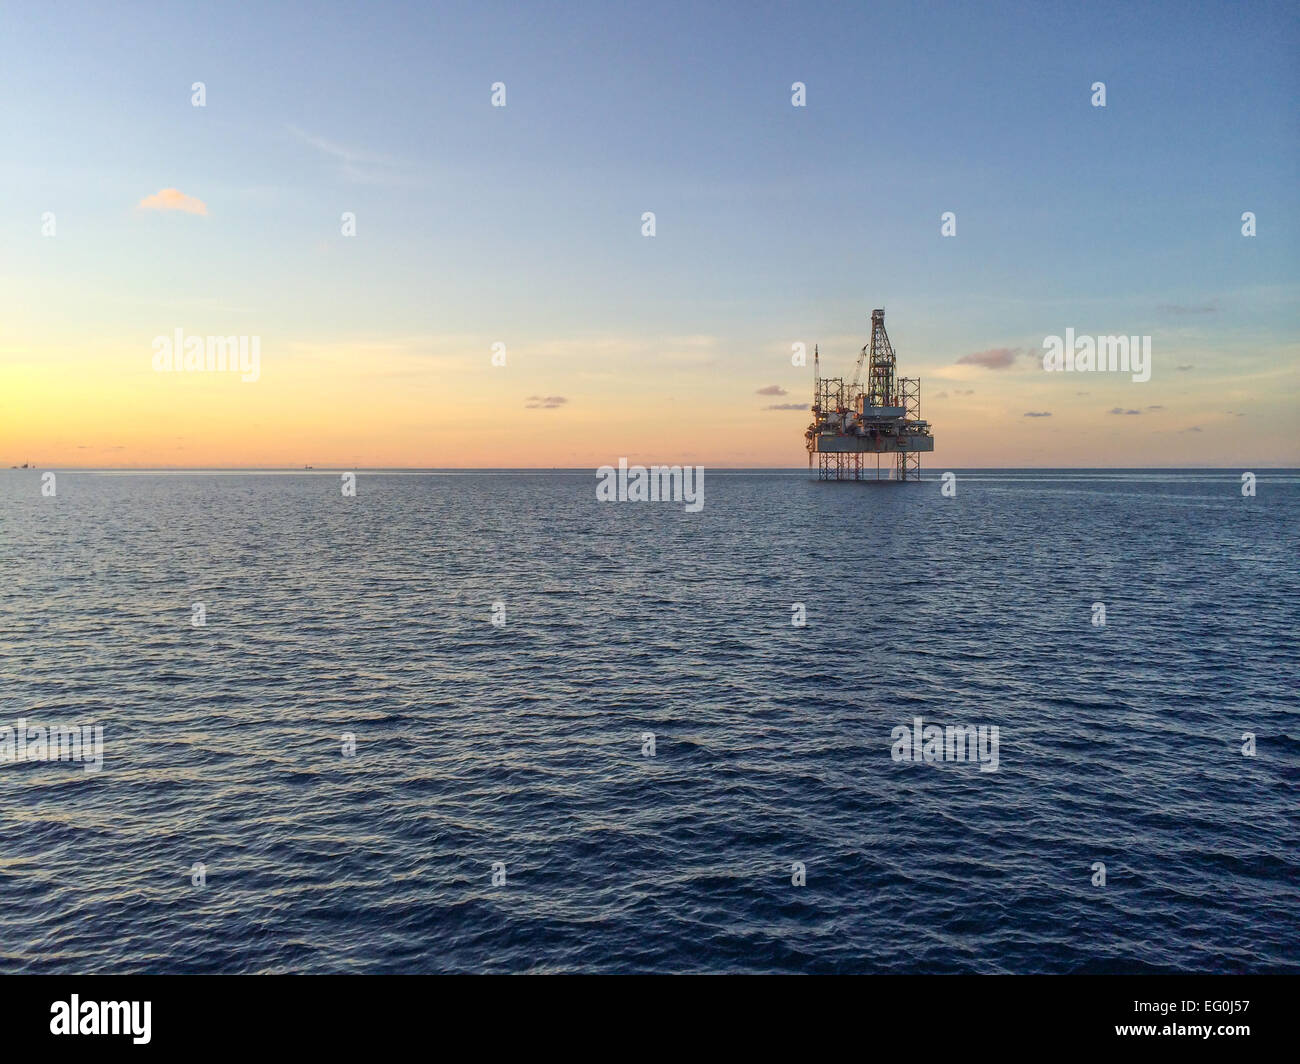 Oil rig at sunset Stock Photo